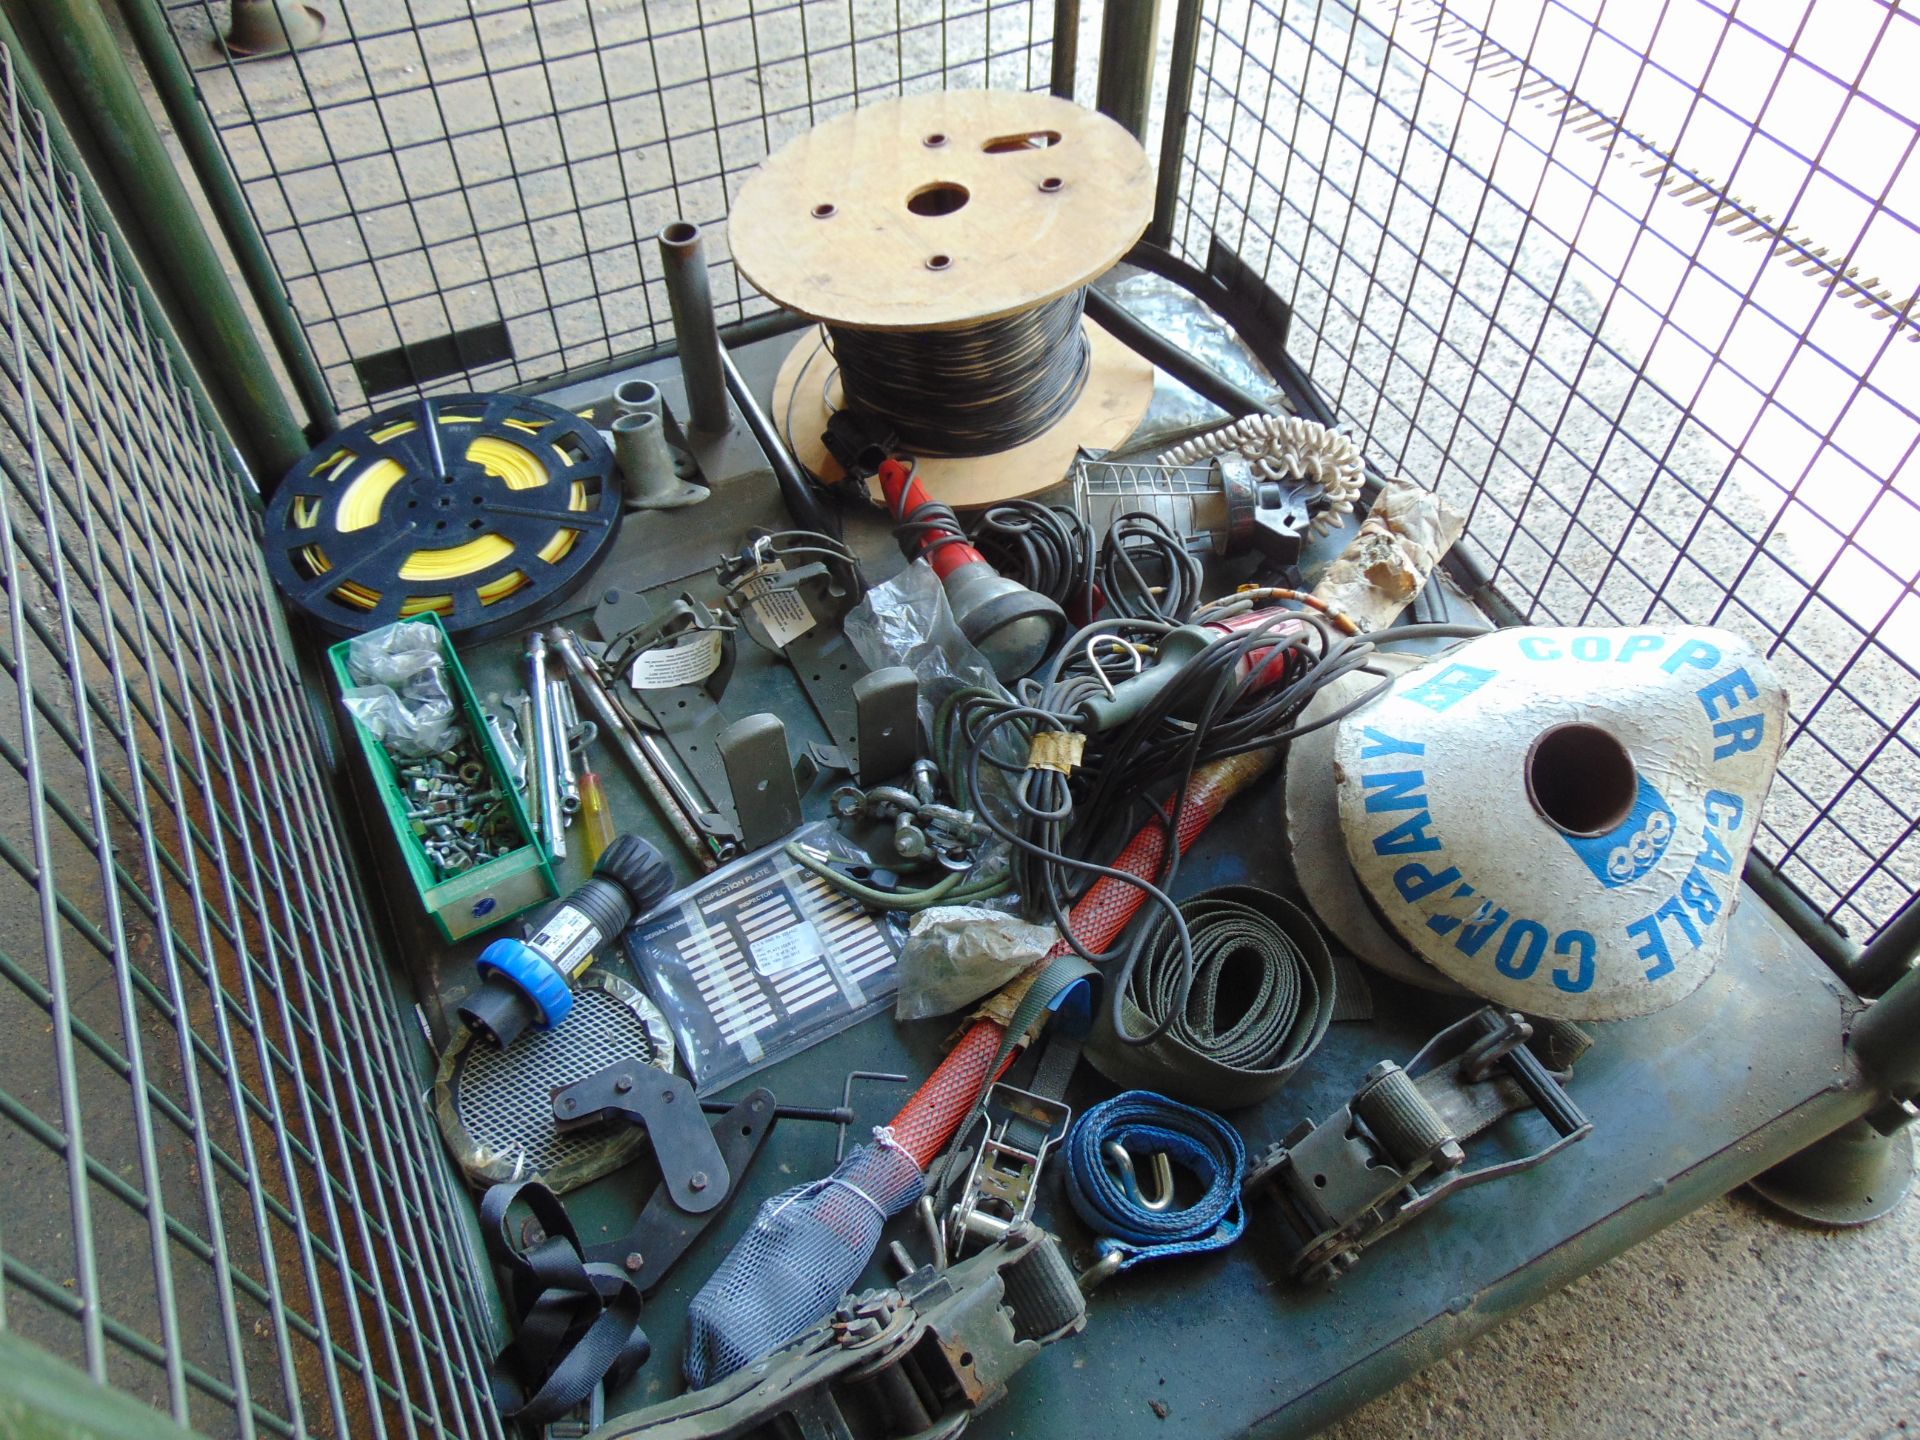 1 x Stillage Cable, Inspection Lamps, Ratchet Straps, Tools, Antenna Bases etc - Image 2 of 8